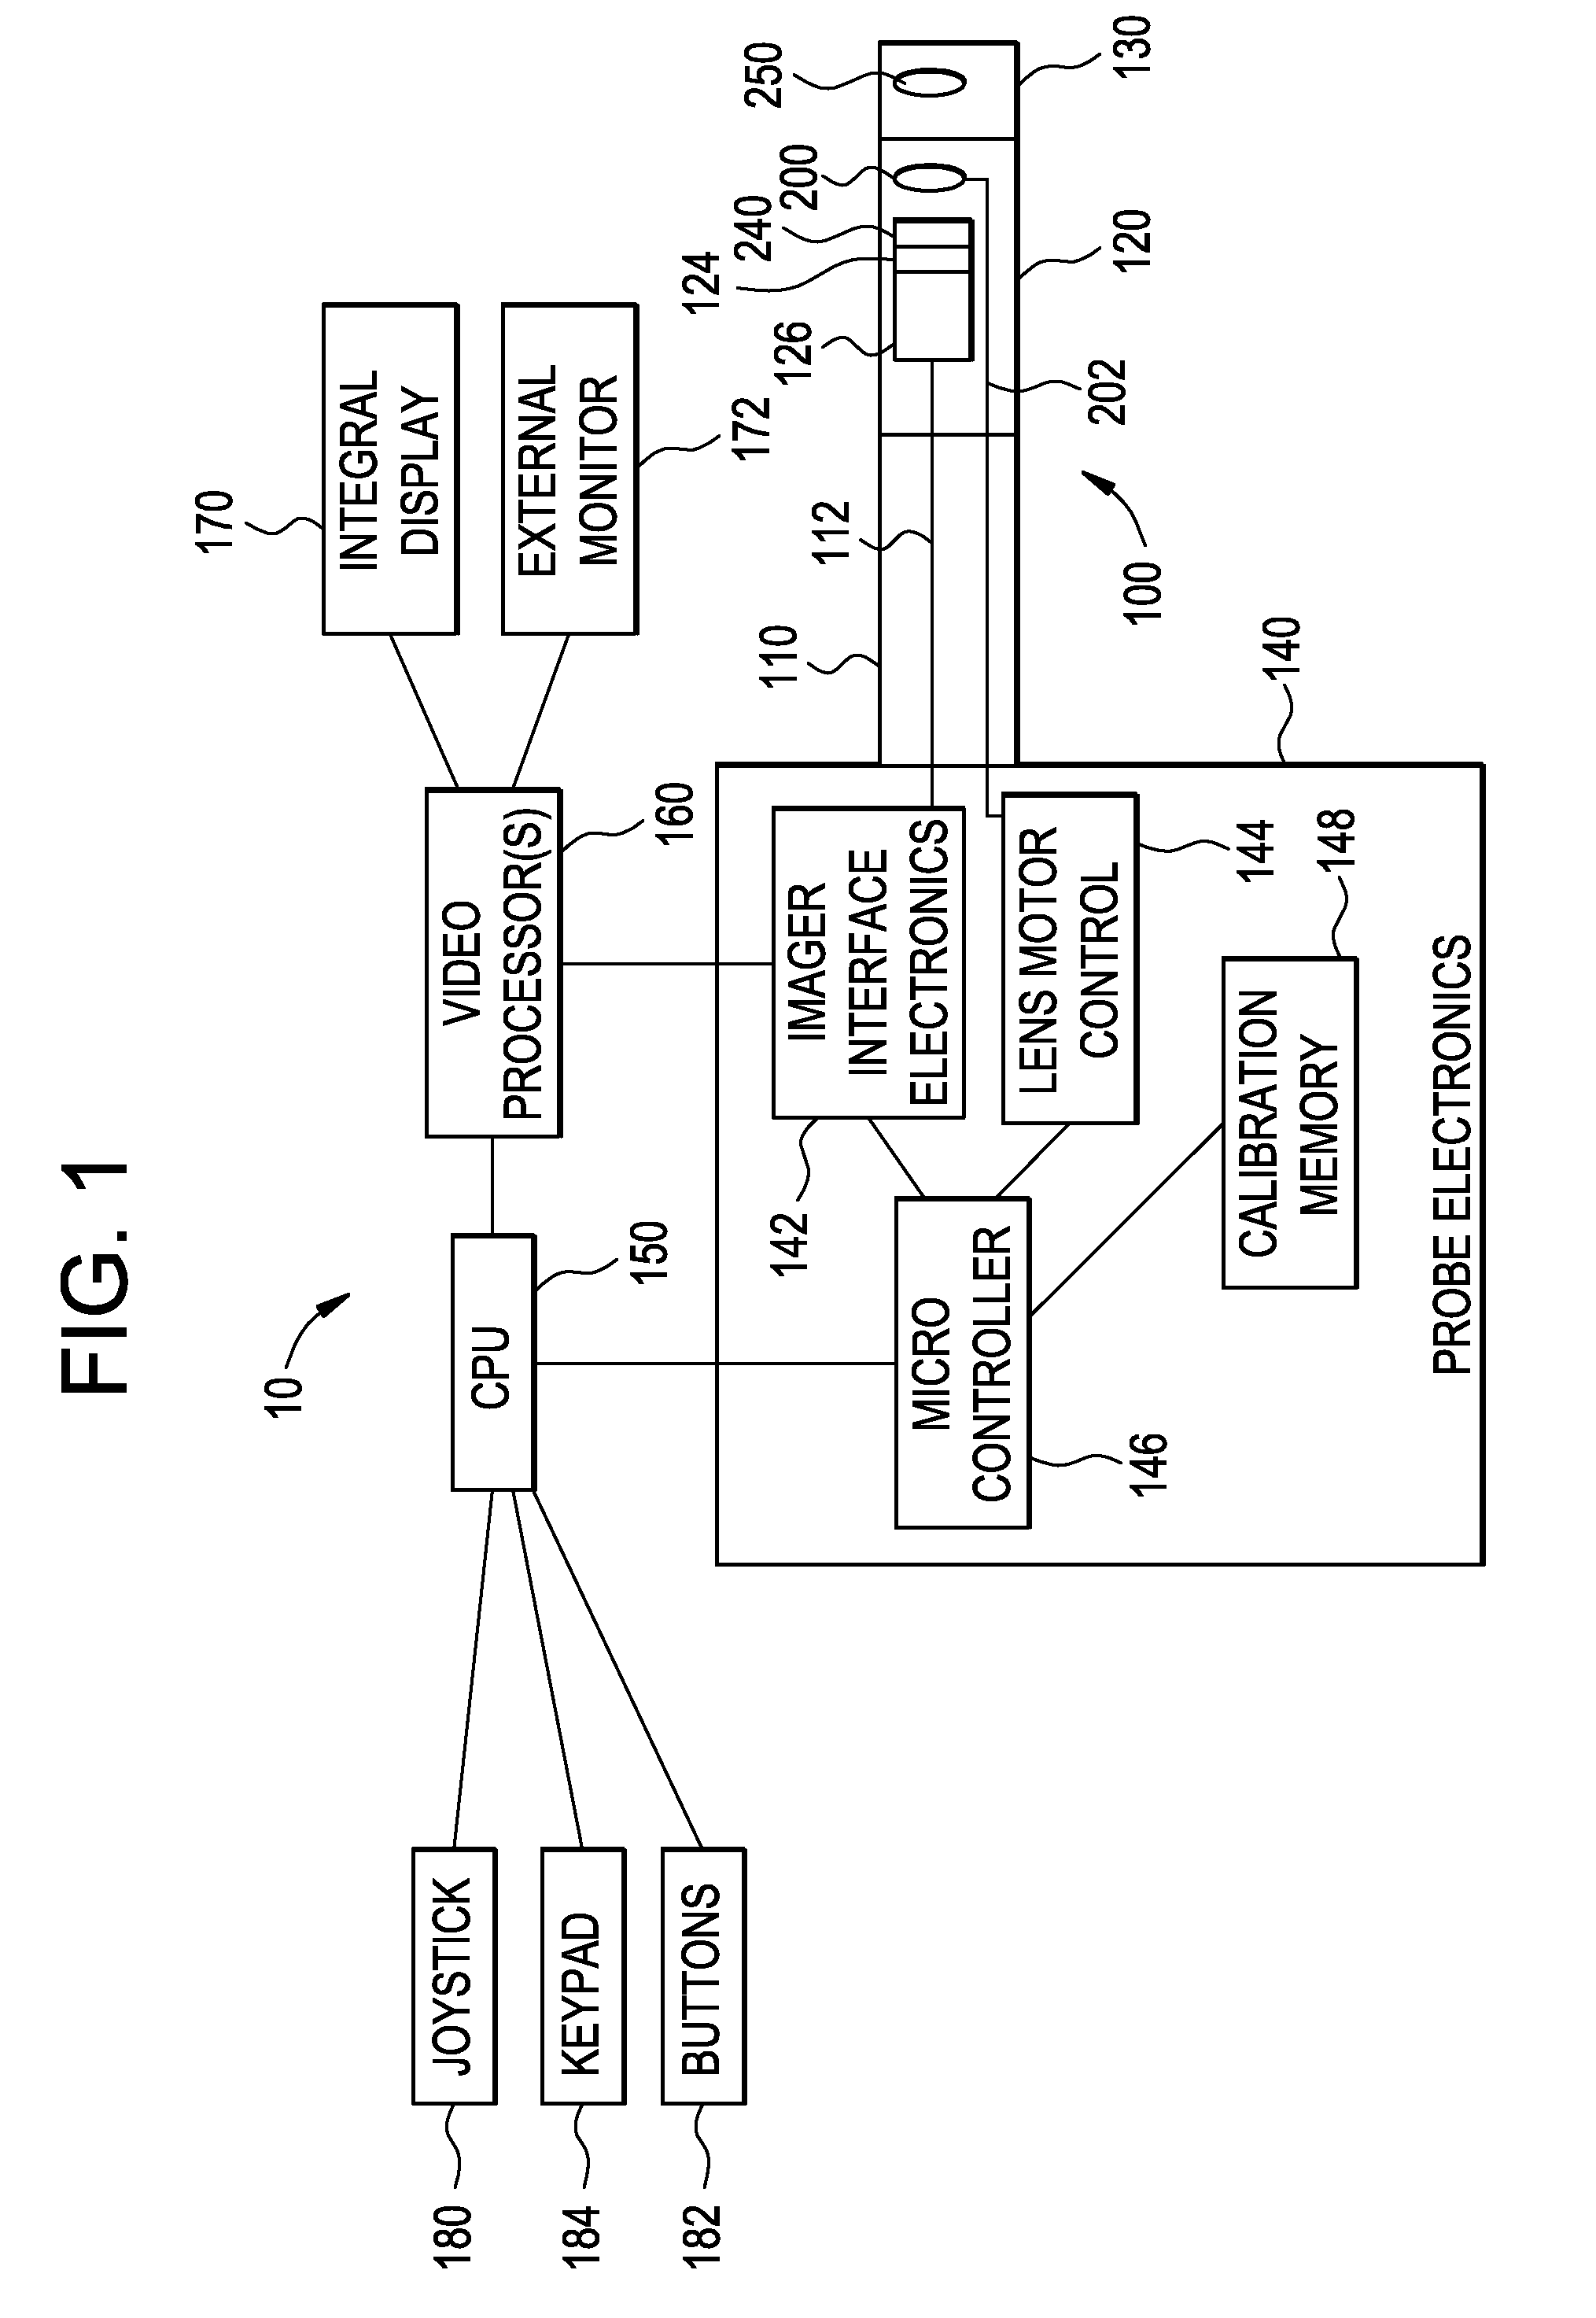 System for providing zoom, focus and aperture control in a video inspection device